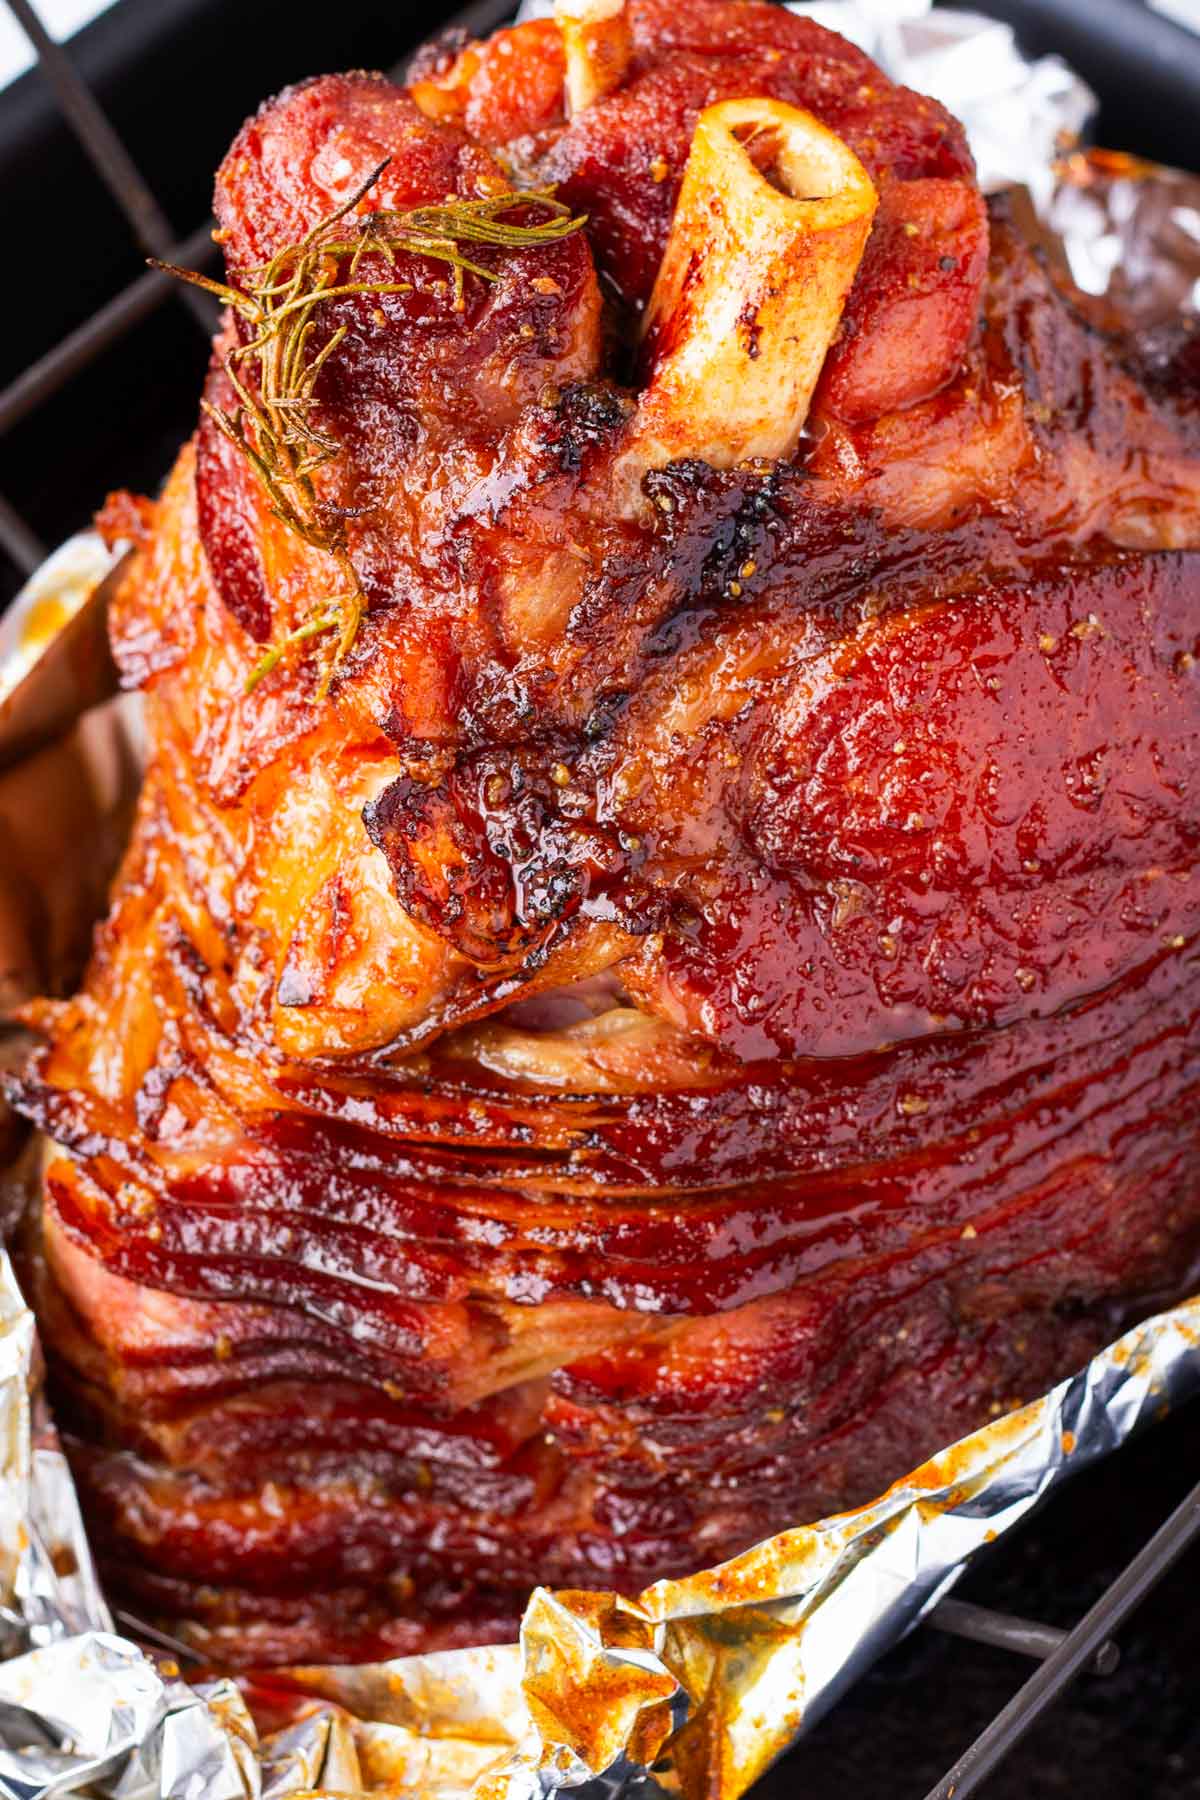 Simple Baked Ham with Brown Sugar Glaze